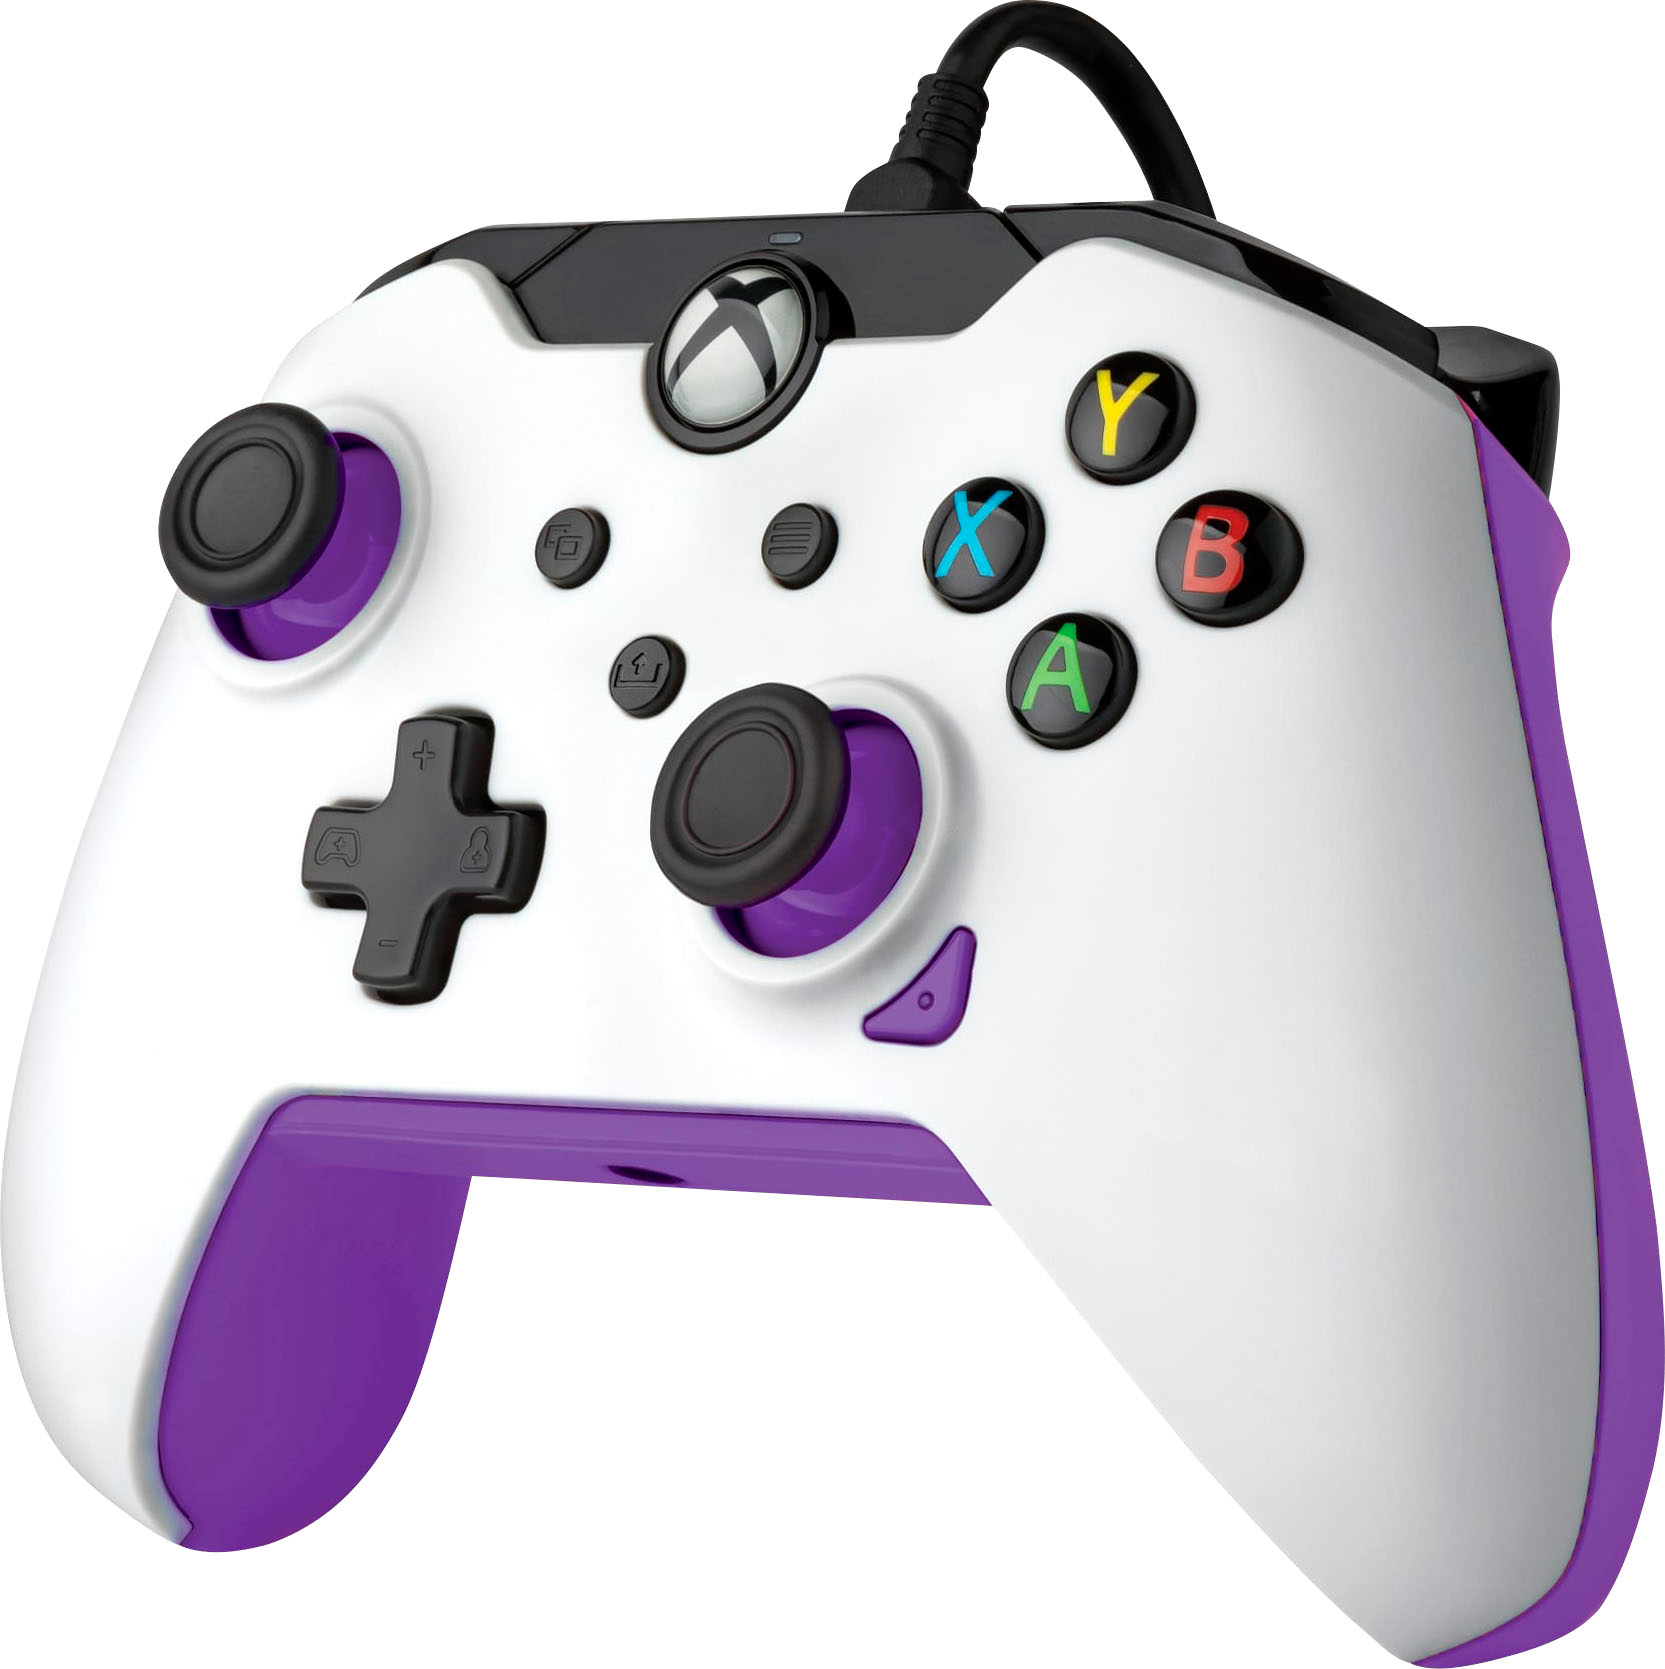 Angle View: PDP - Wired Controller - Xbox Series X|S, Xbox One, Xbox, Windows 10/11 - Kinetic White